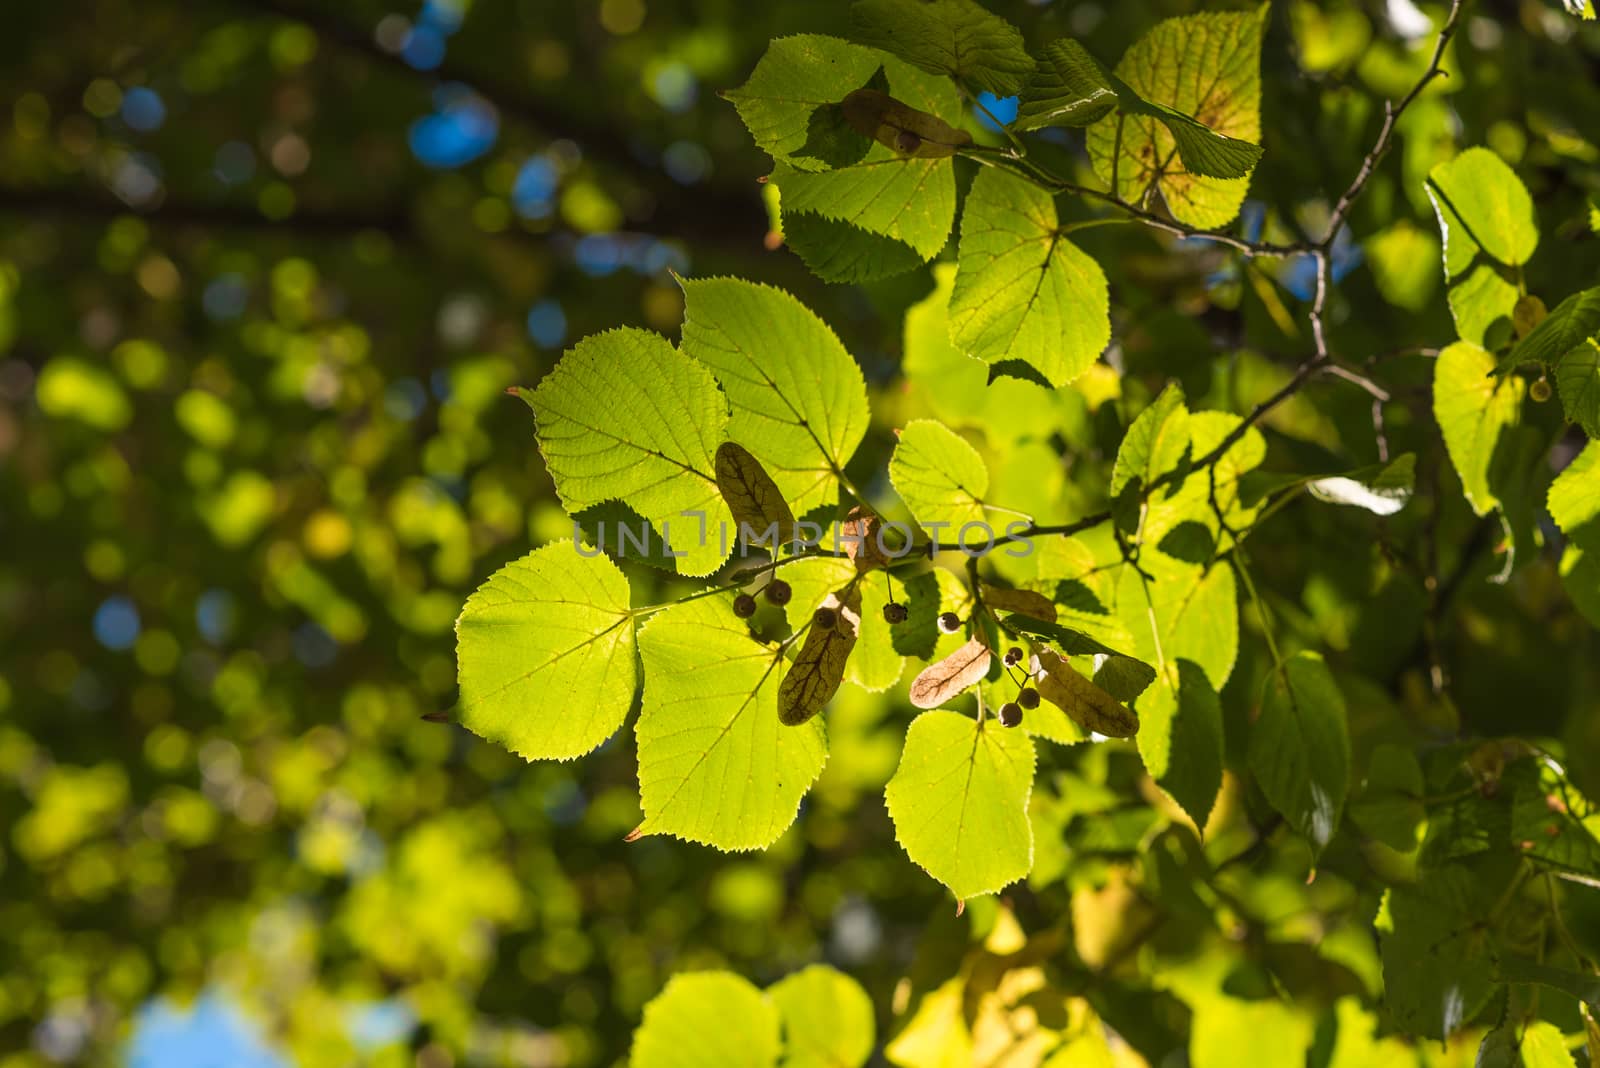 Leaves of linden tree lit thoroughly by sun.